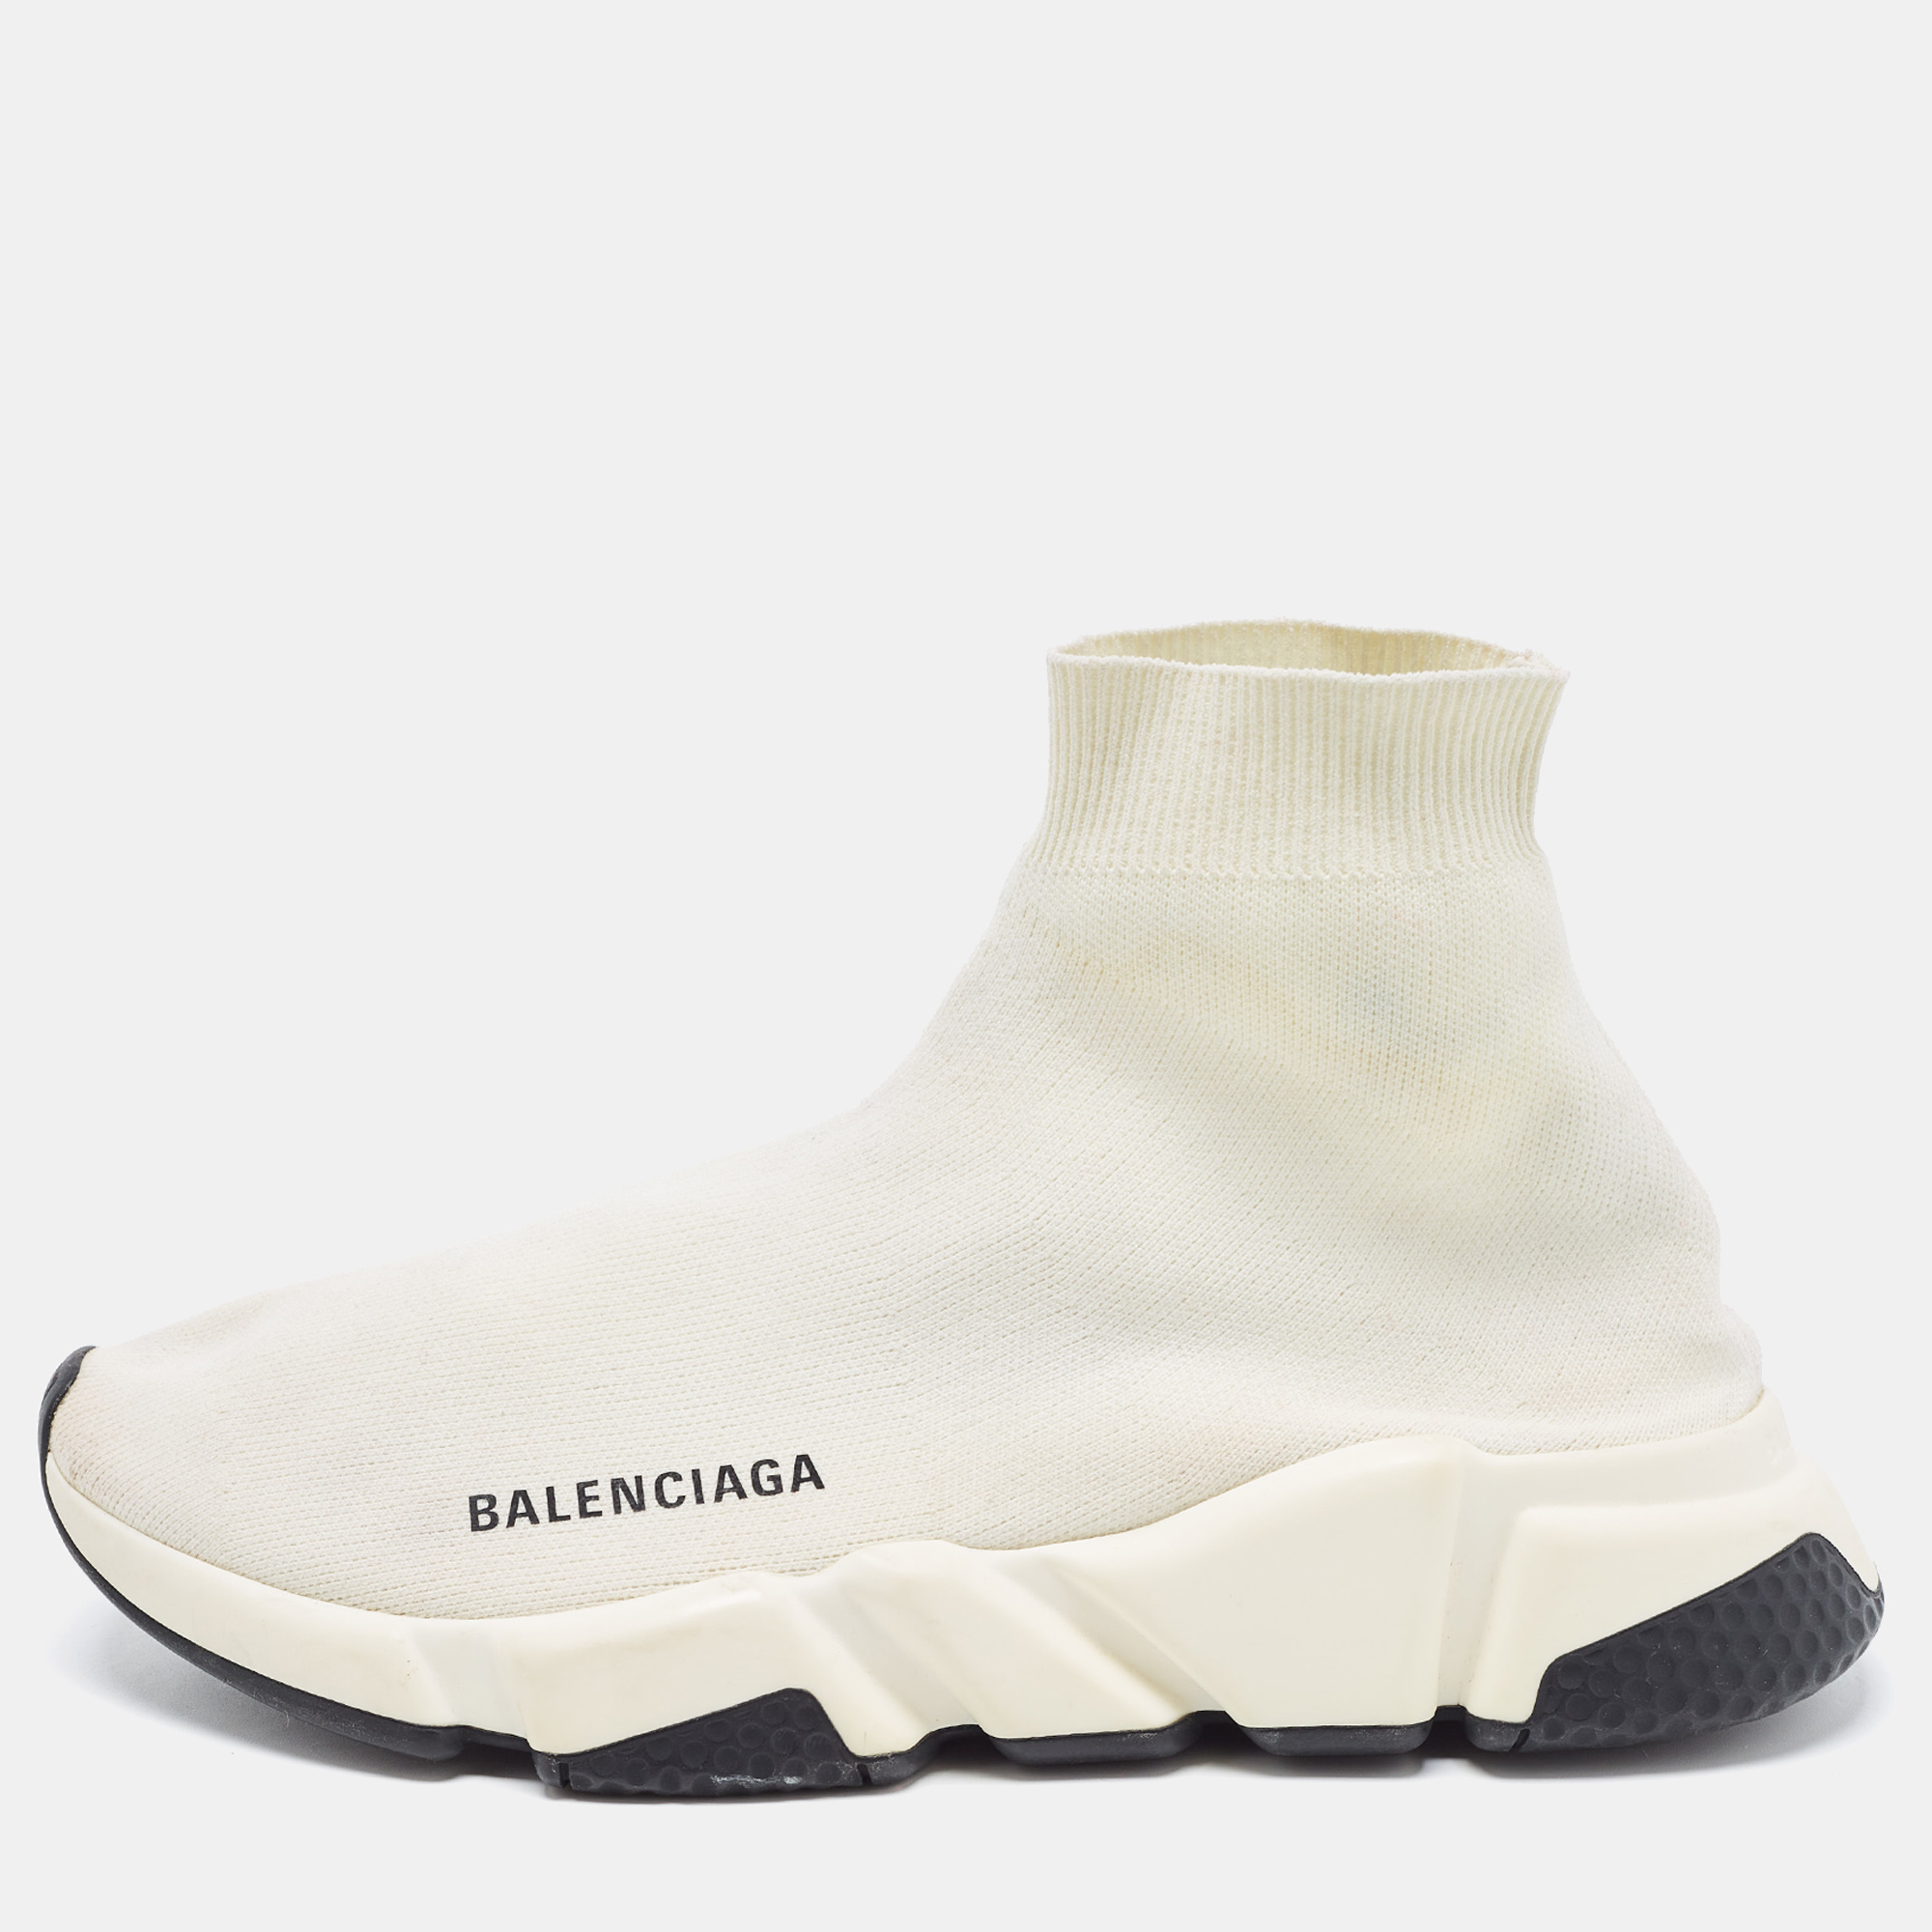 Balenciaga White Knit Fabric Speed High Top  Sneakers Size 38